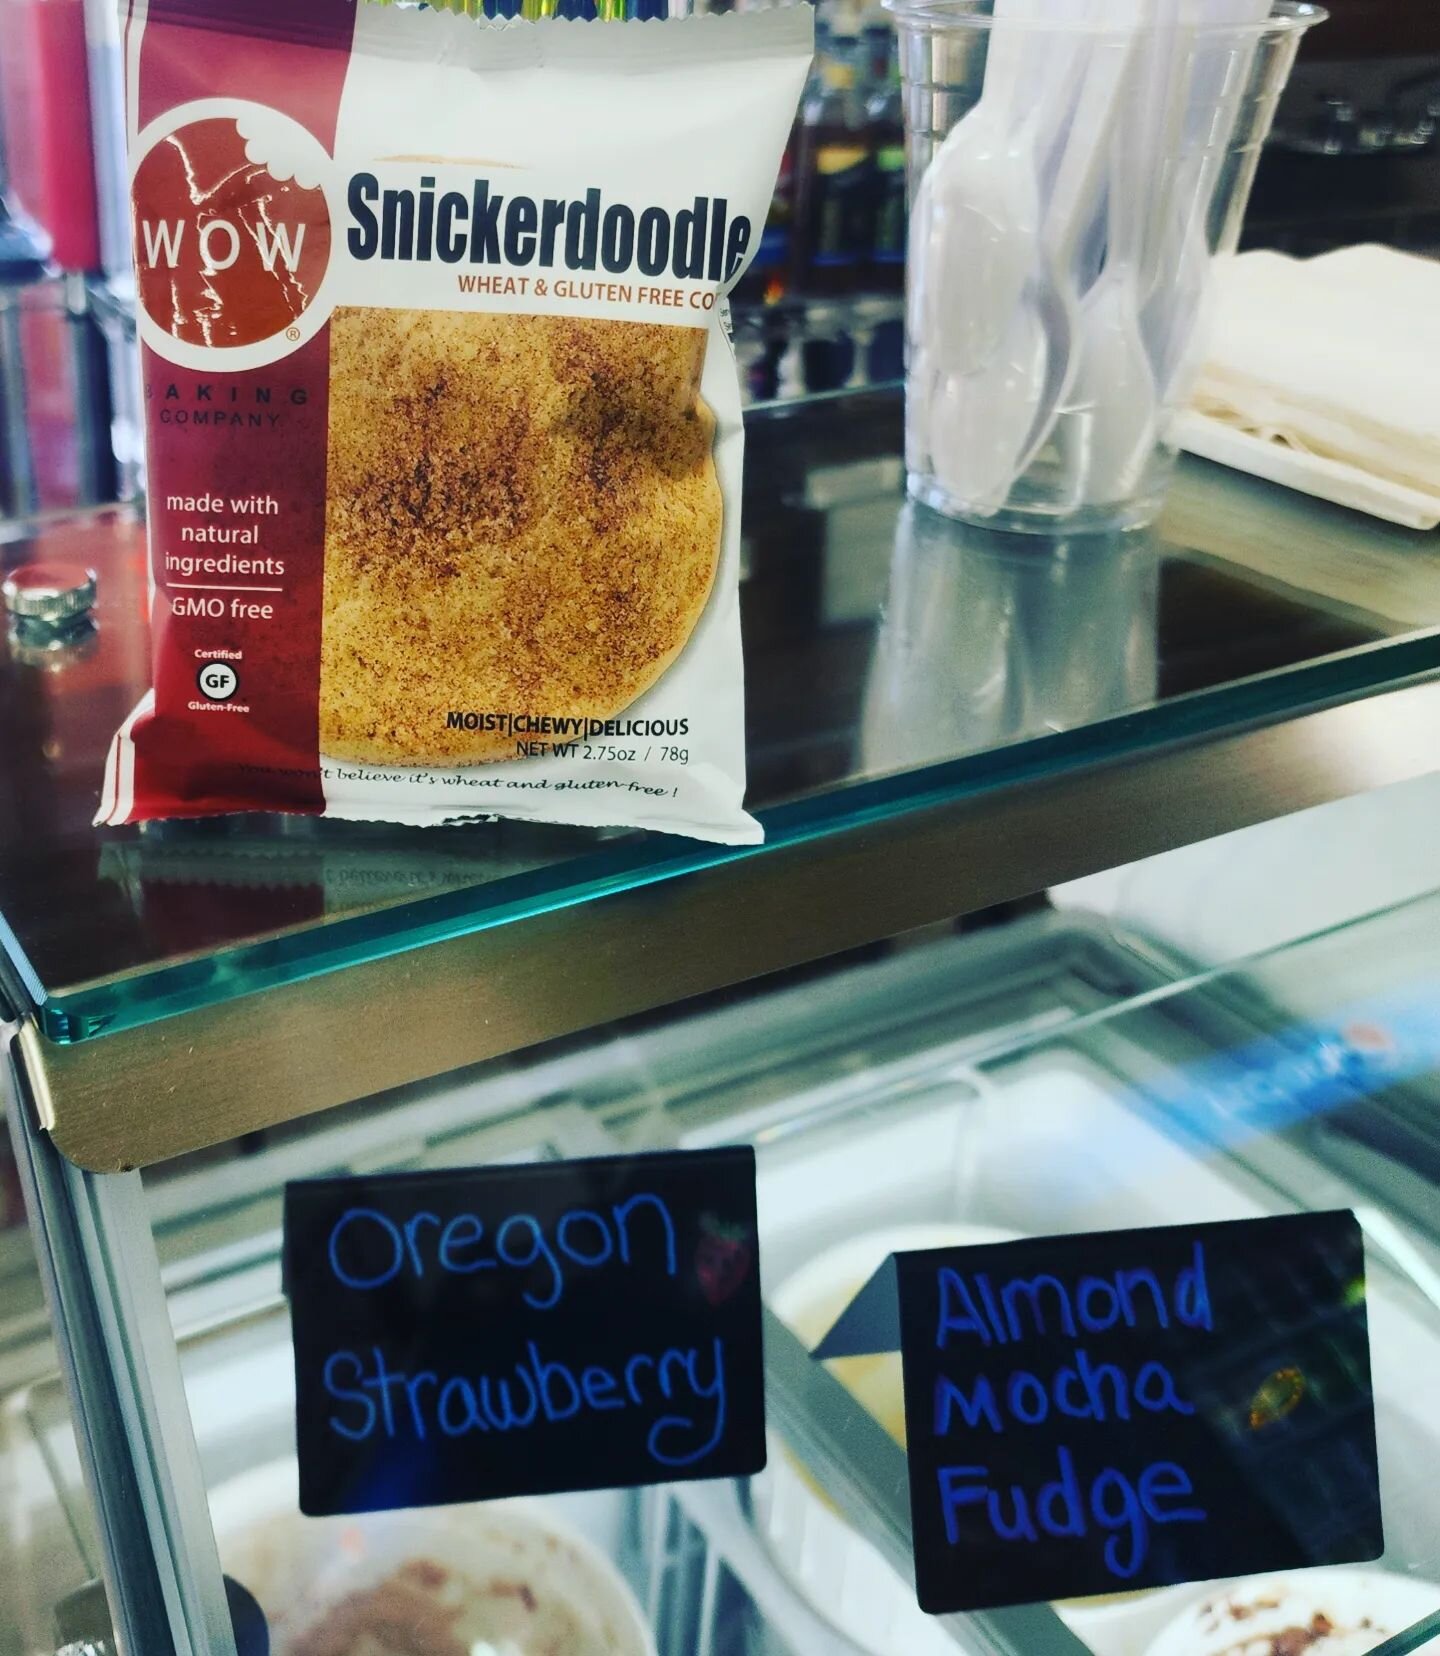 Come try this Gluten and wheat free Snickerdoodle, it's so good!